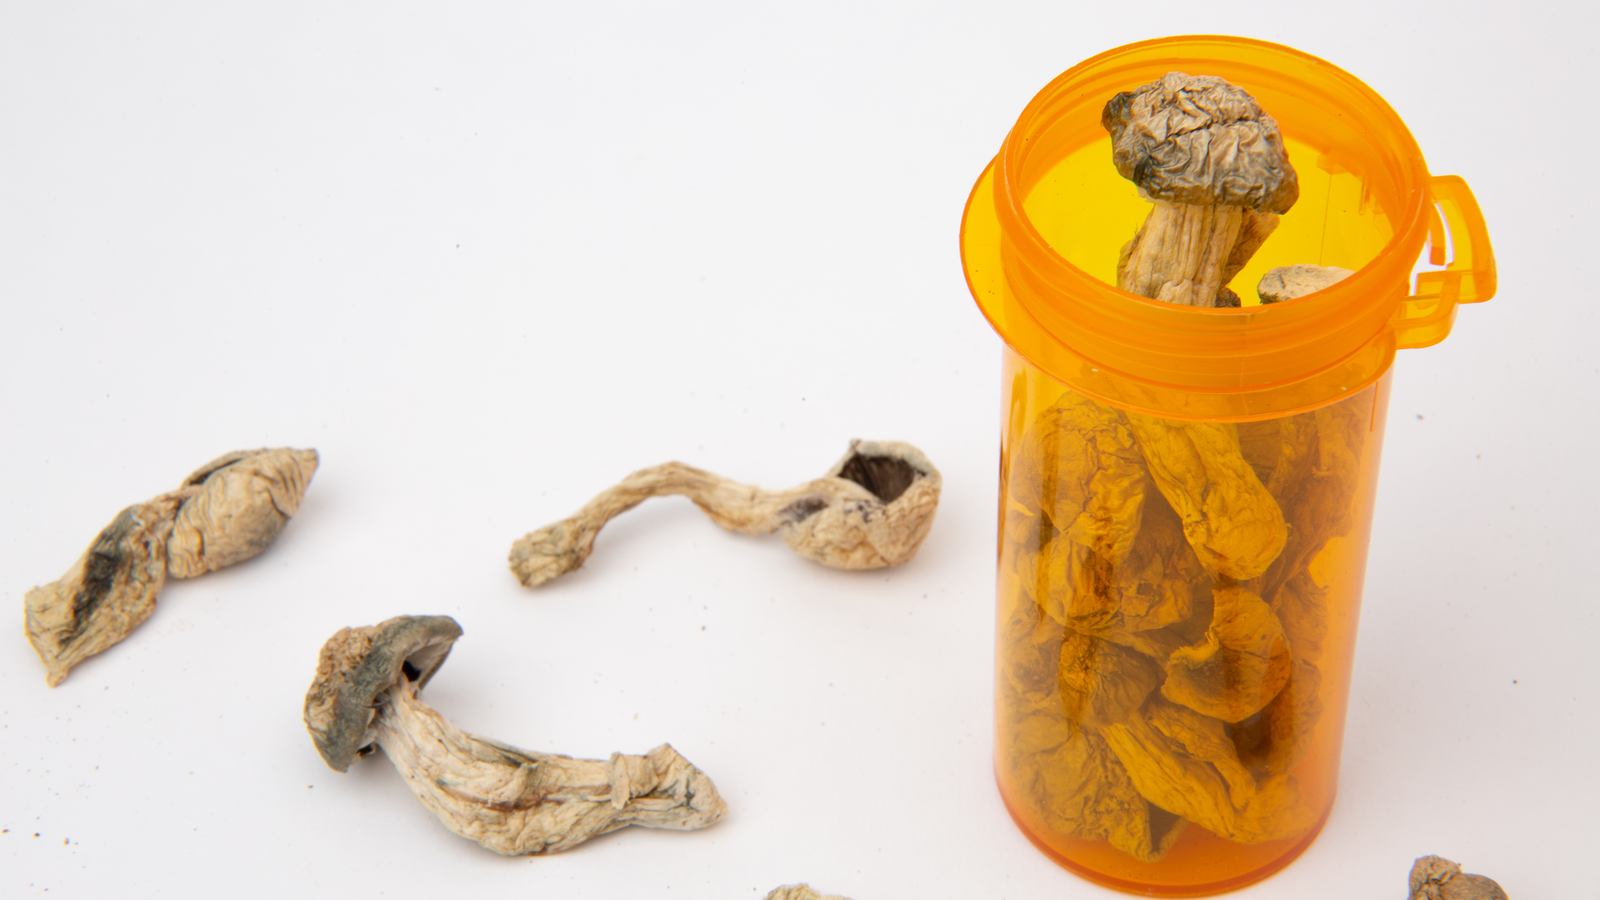 MNMD Stock. Dried psilocybe cubensis psilocybin magic mushrooms inside and around a plastic prescription medicine bottle with no lid isolated on white background, Mind Medicine is in the psychedelic medicine business